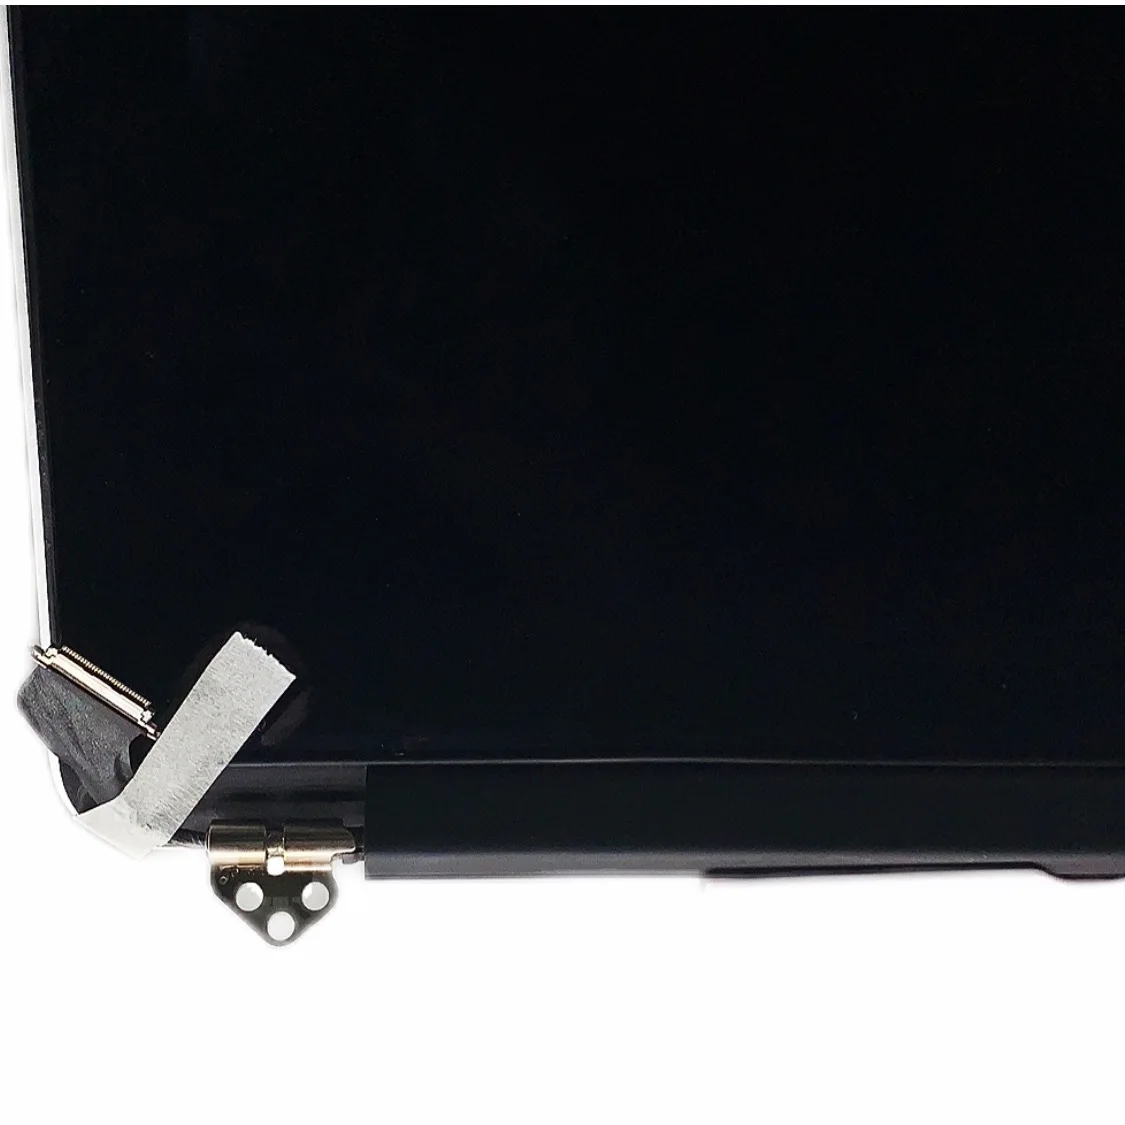 New A1502 Full Display Assembly for Macbook Pro Retina 13 A1502 lcd  assembly Later 2013 Mid 2014 EMC 2678/2875